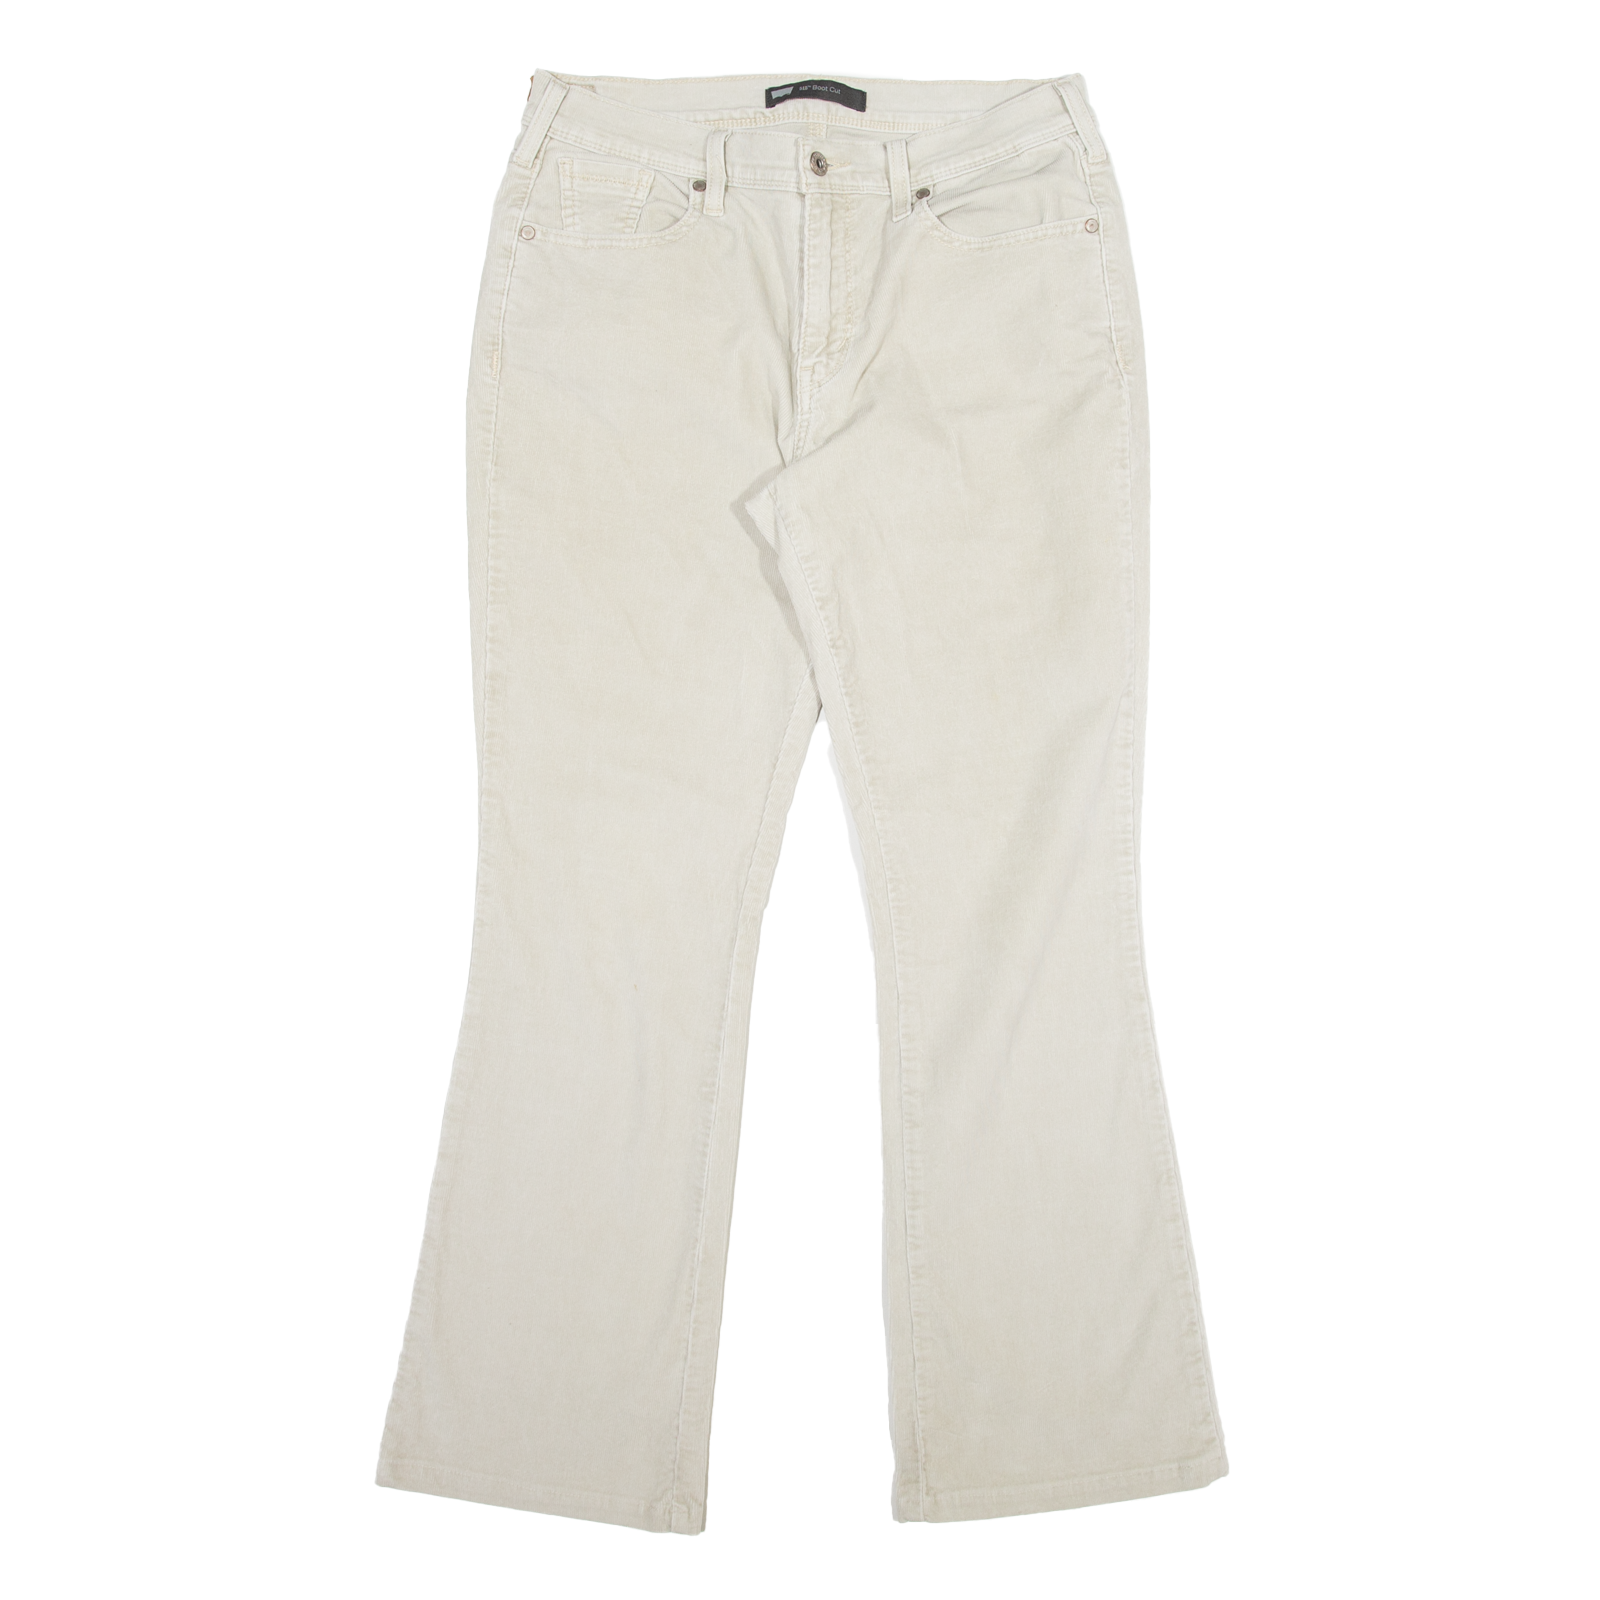 River Island tapered corduroy trousers in cream | ASOS